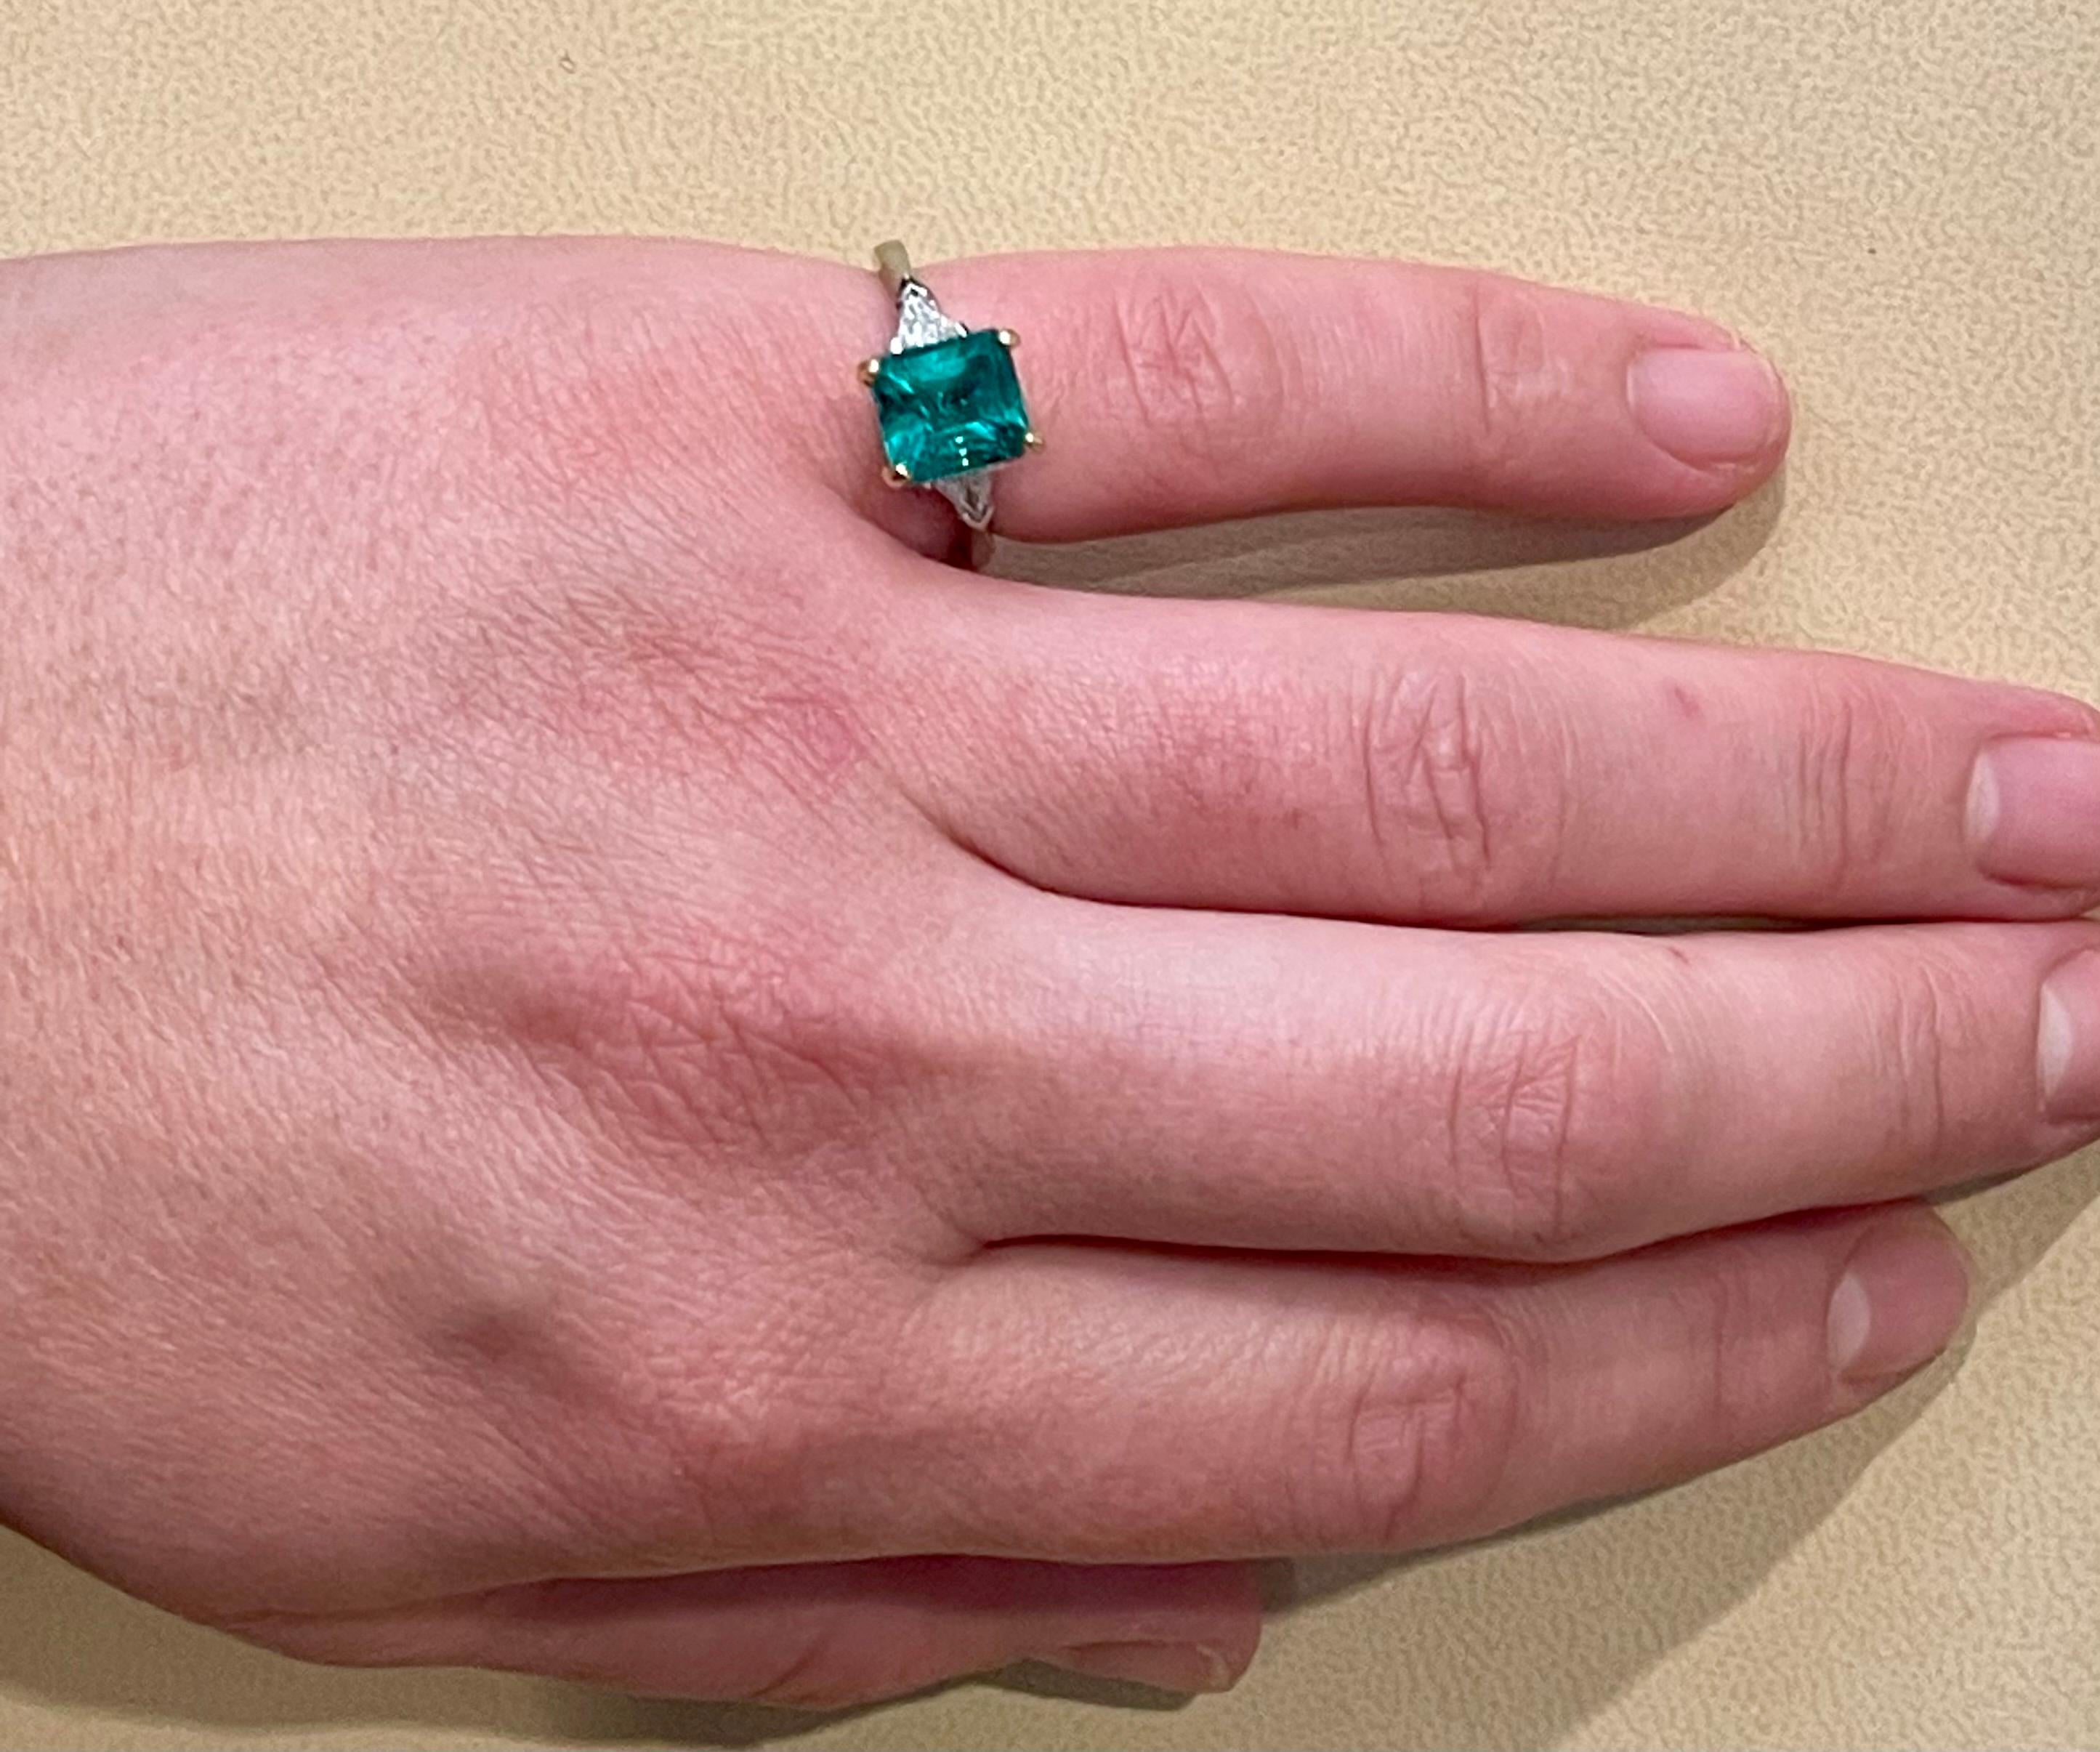 2.7 Carat Emerald Cut Colombian Emerald & 0.60Ct Diamond Ring 18K White/Y Gold For Sale 7